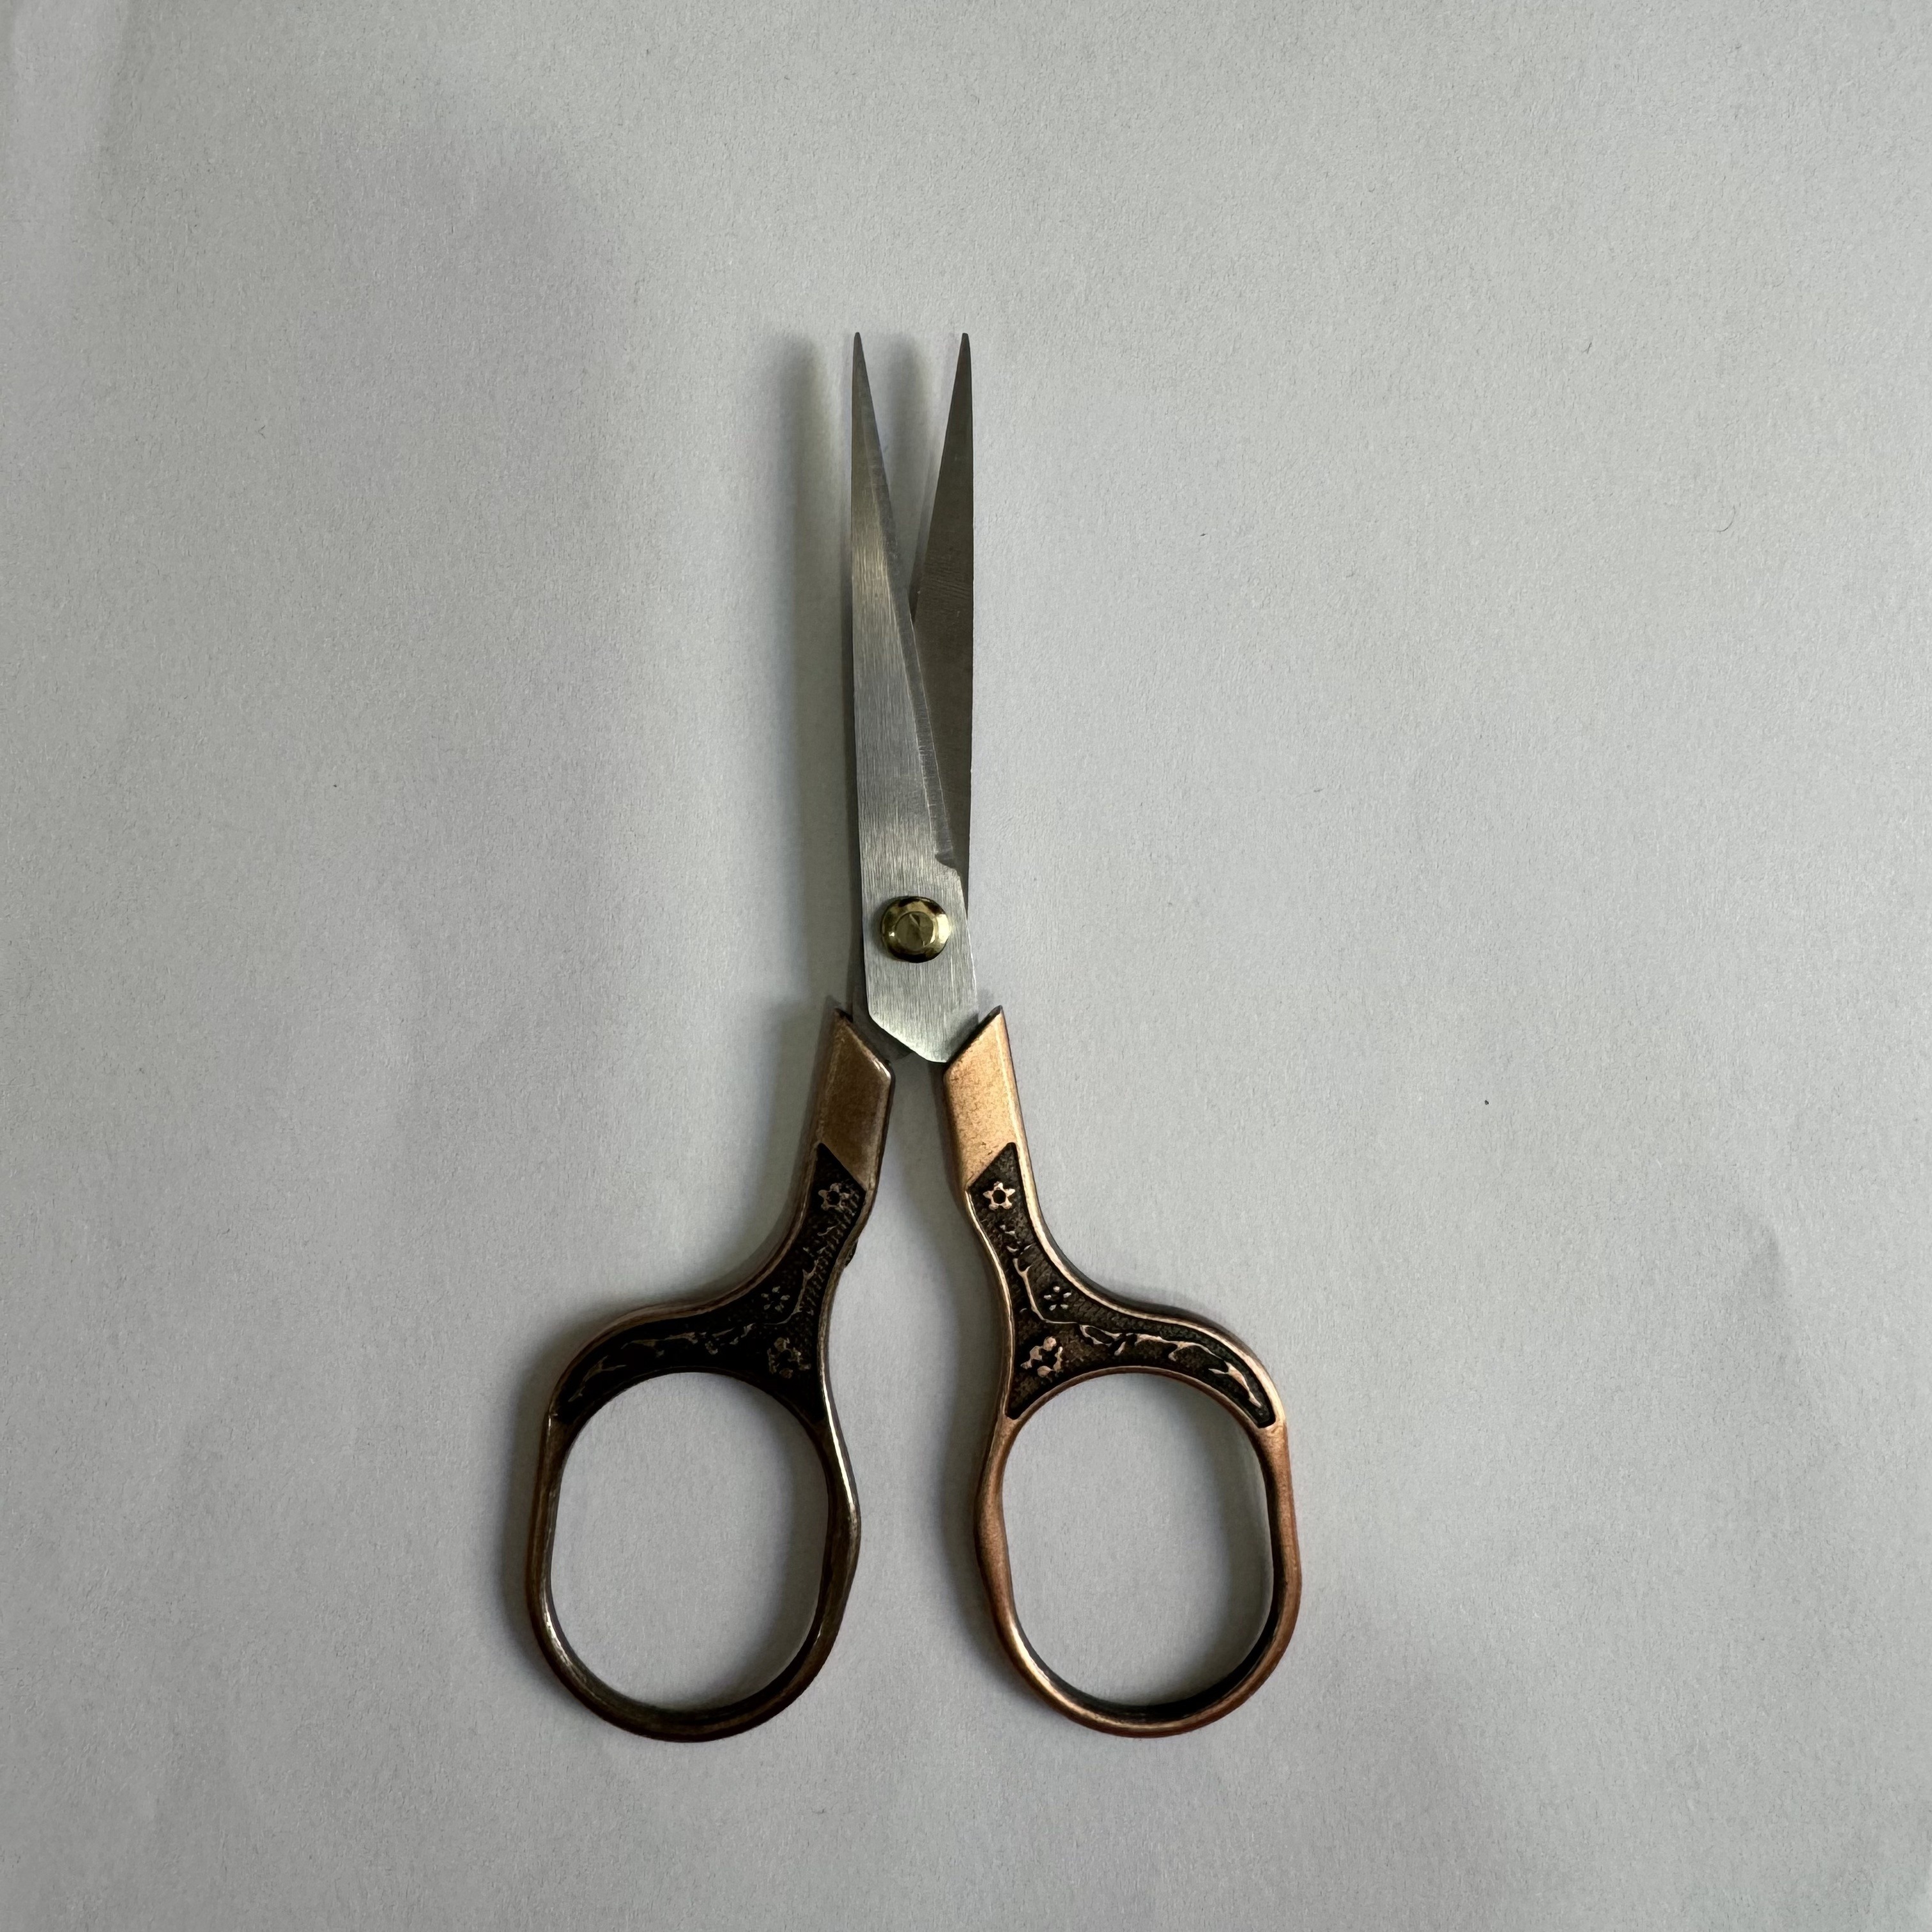 Cardboard Scissors Carpet Cutter ToolsStainless Steel Tufting Carpet Shears  for General Arts Crafts (Silver) Other Sewing Embroidery Supplies